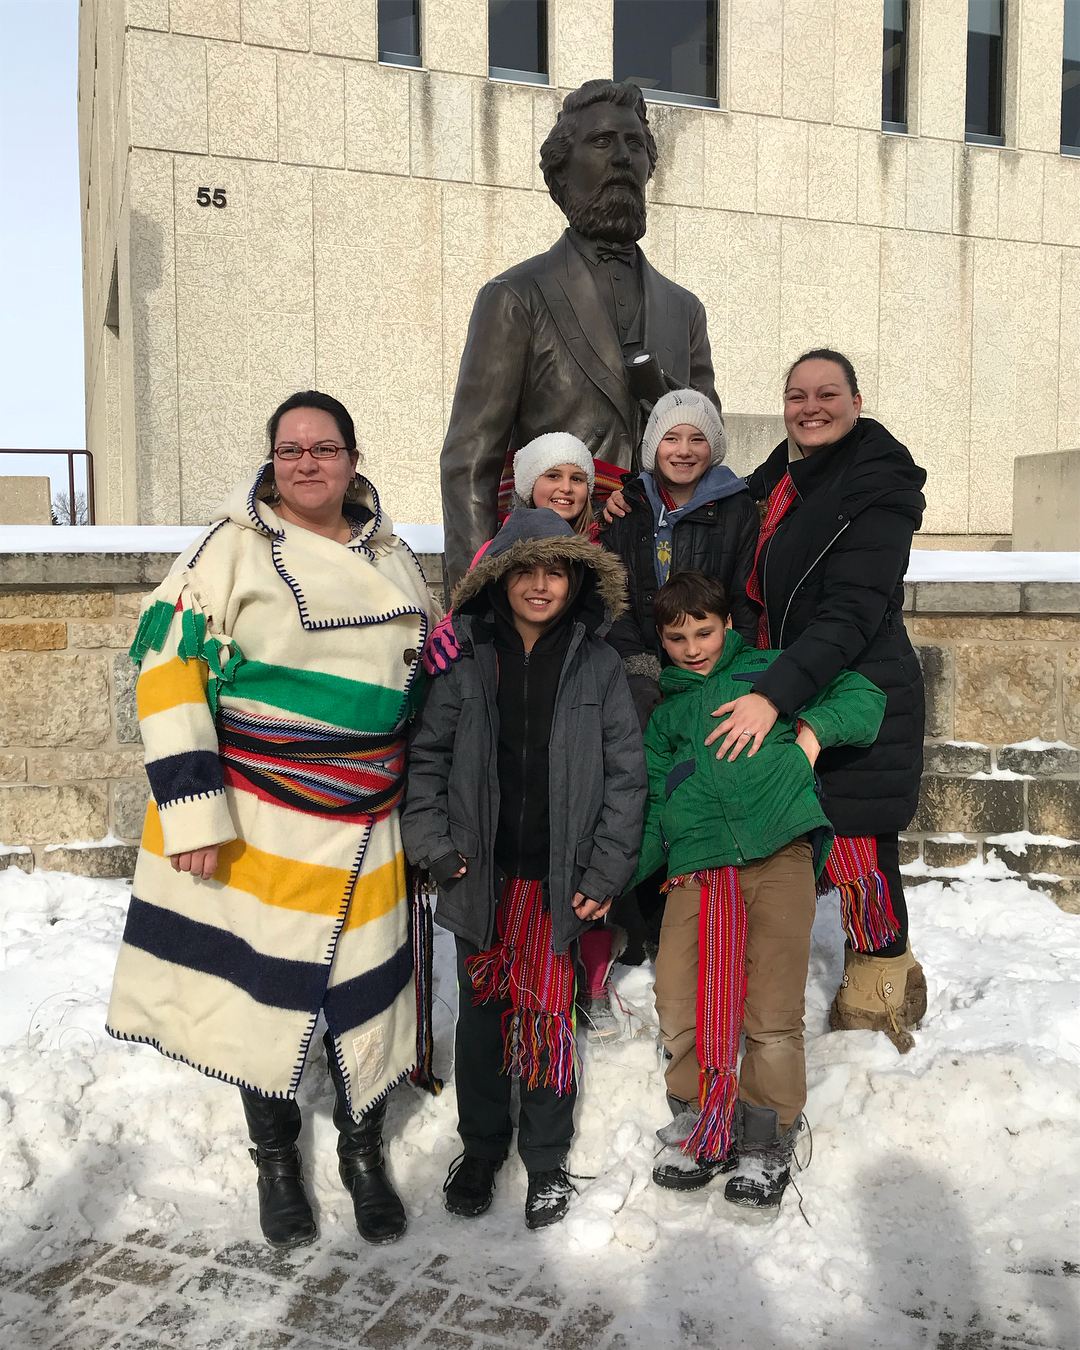 Chii Miigwech to our Métis director of the Indigenous Student Center, Christine Cyr, @musaumanitoba, and everyone who made our Louis Riel Day Celebrations possible. Pictured here: Christine Cyr, Charlene Hallett and family. #umindigenous #umanitoba #umstudent #LouisRielDay